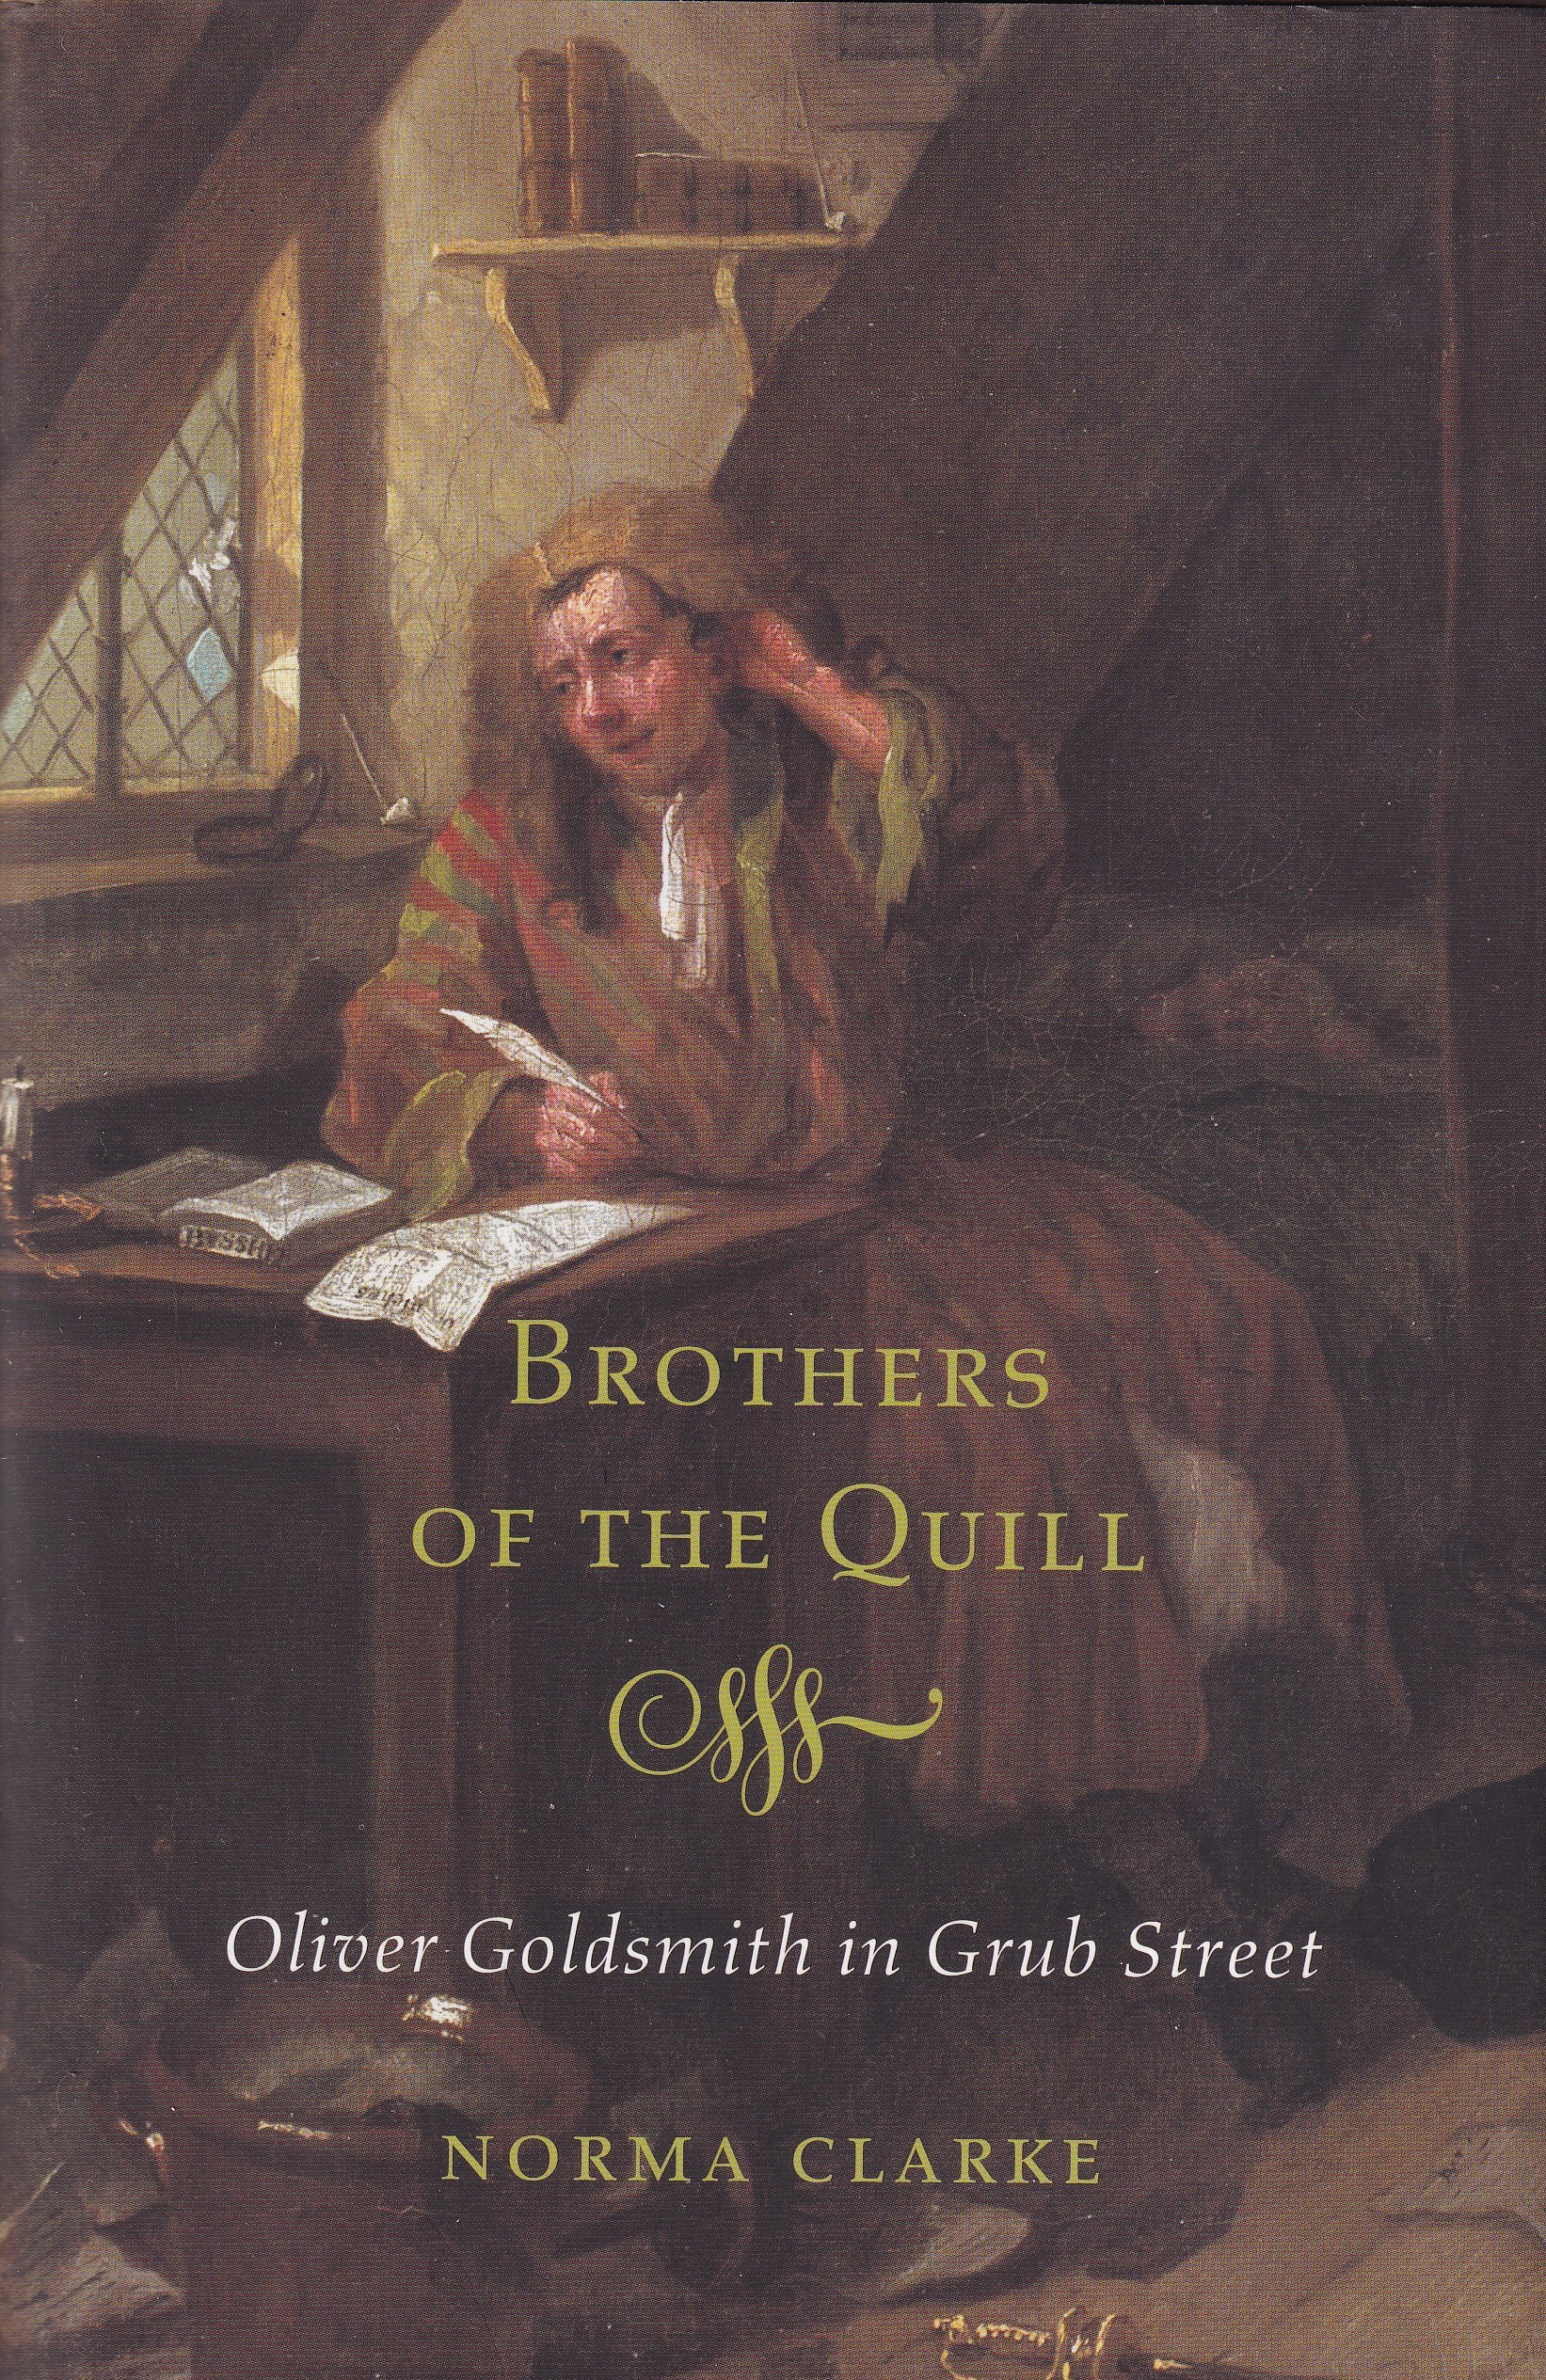 Brothers of the Quill: Oliver Goldsmith in Grub Street | Norma Clarke | Charlie Byrne's